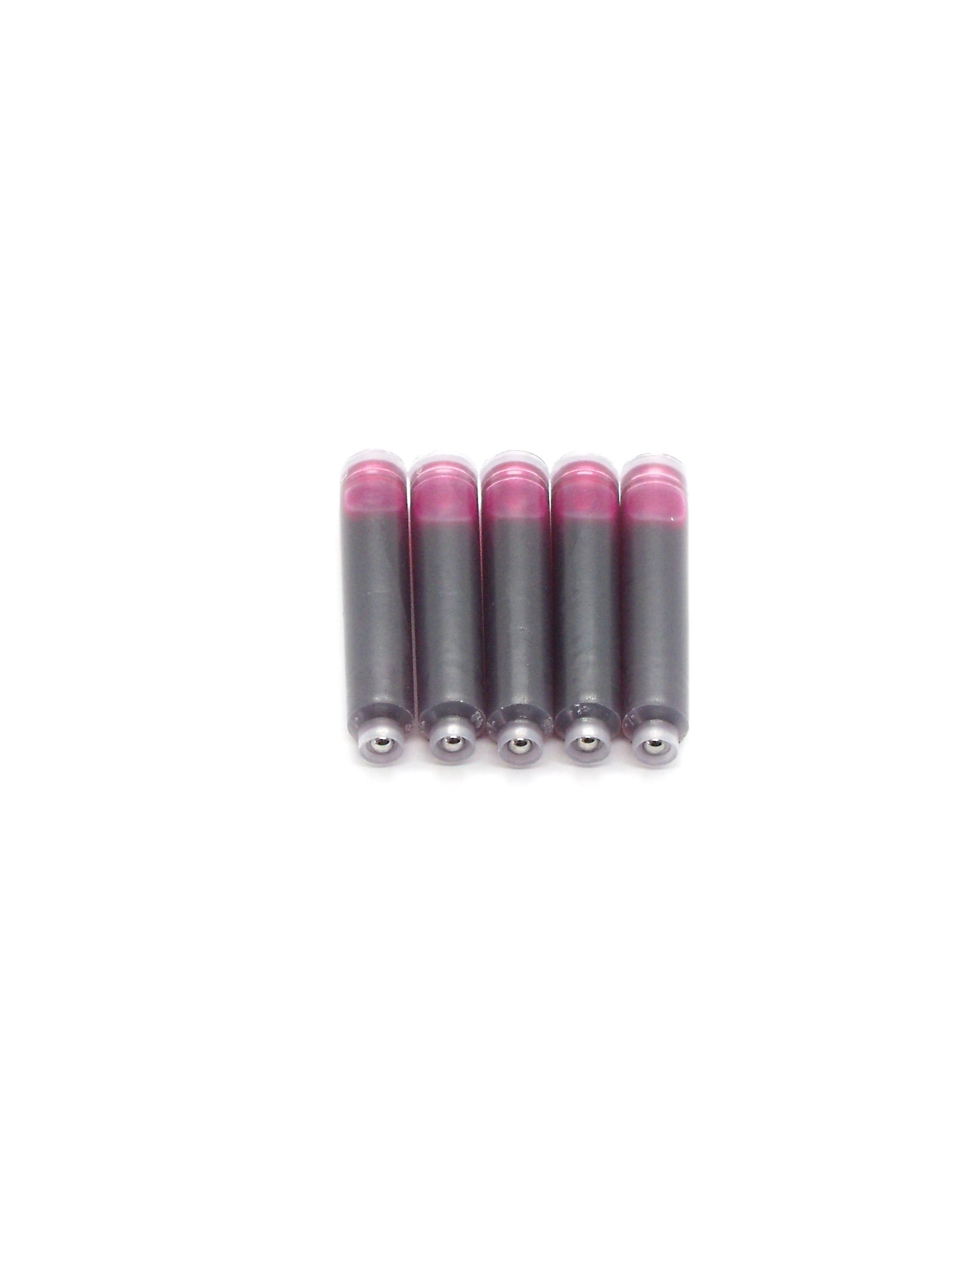 Top Ink Cartridges For Regal Fountain Pens (Pink)